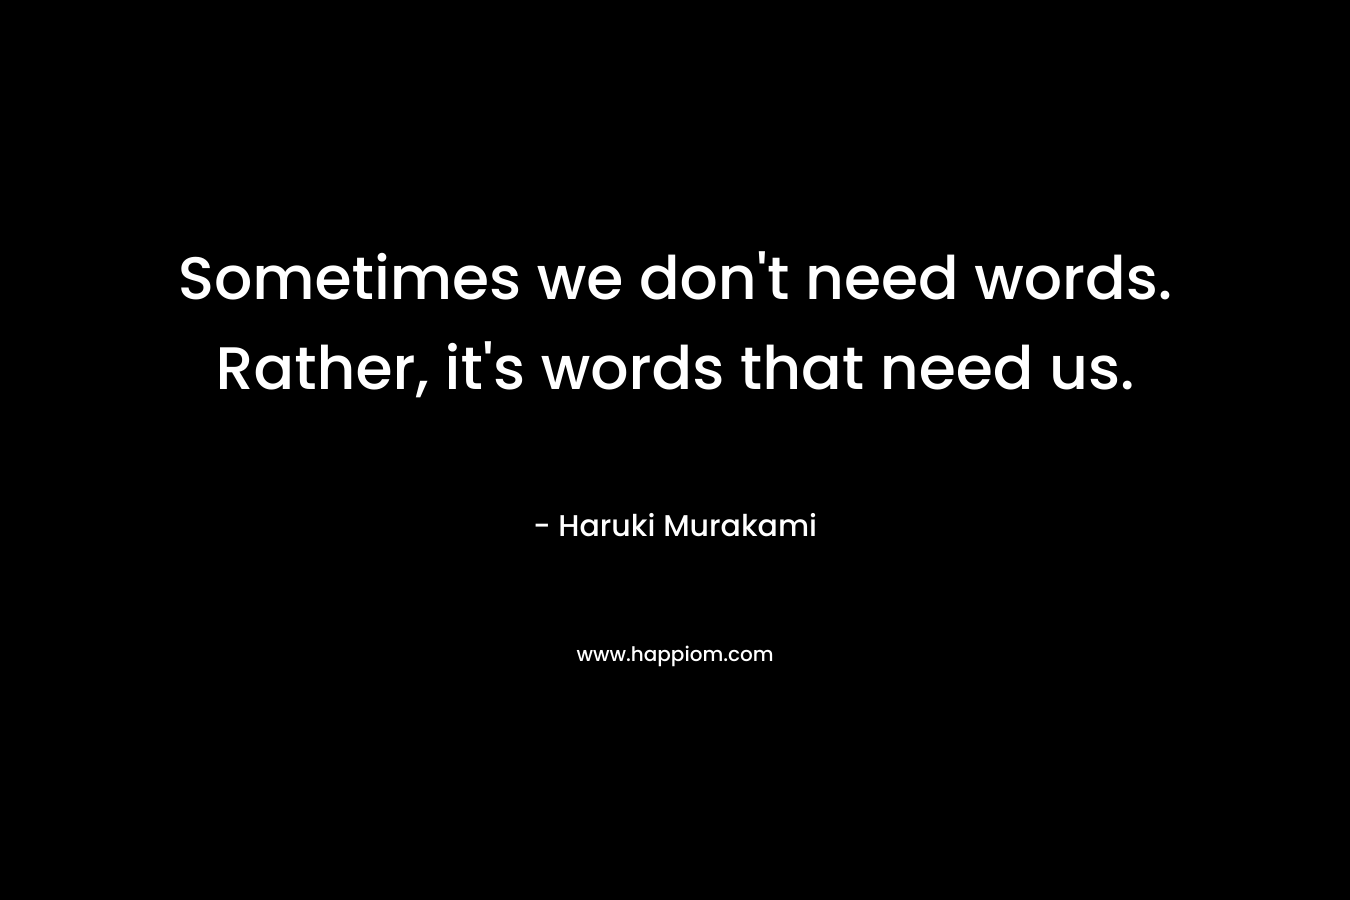 Sometimes we don't need words. Rather, it's words that need us.